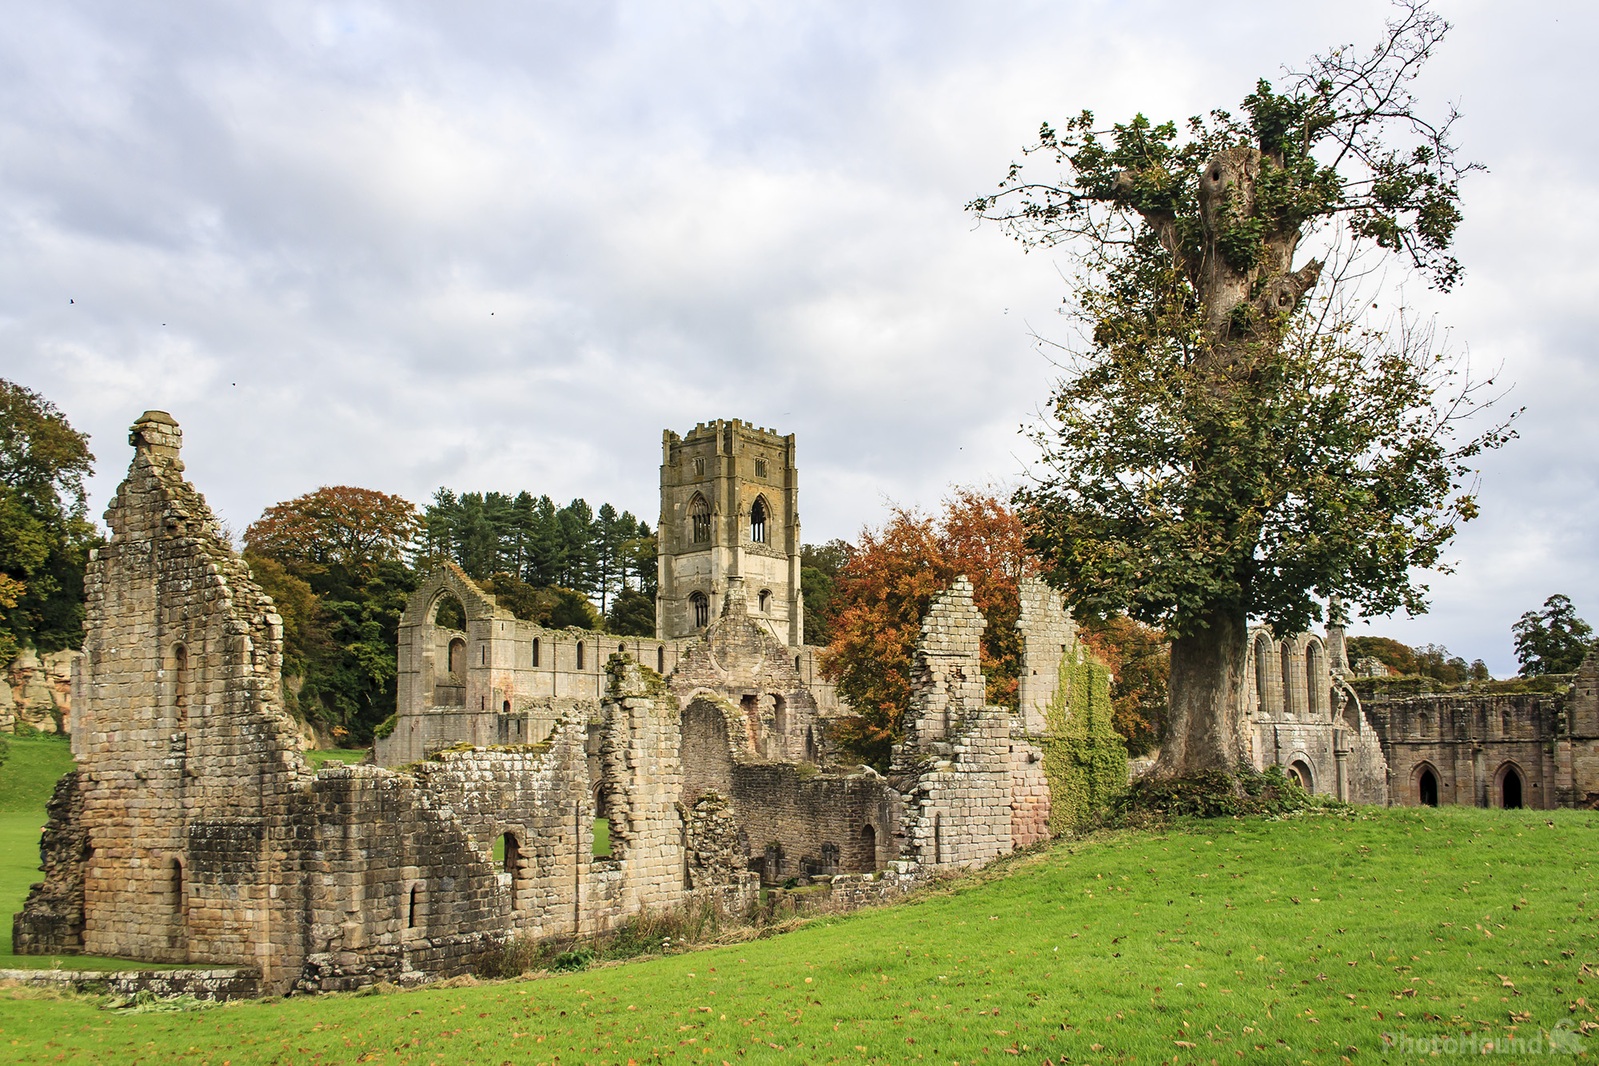 Image of Fountains Abbey by Carol Henson